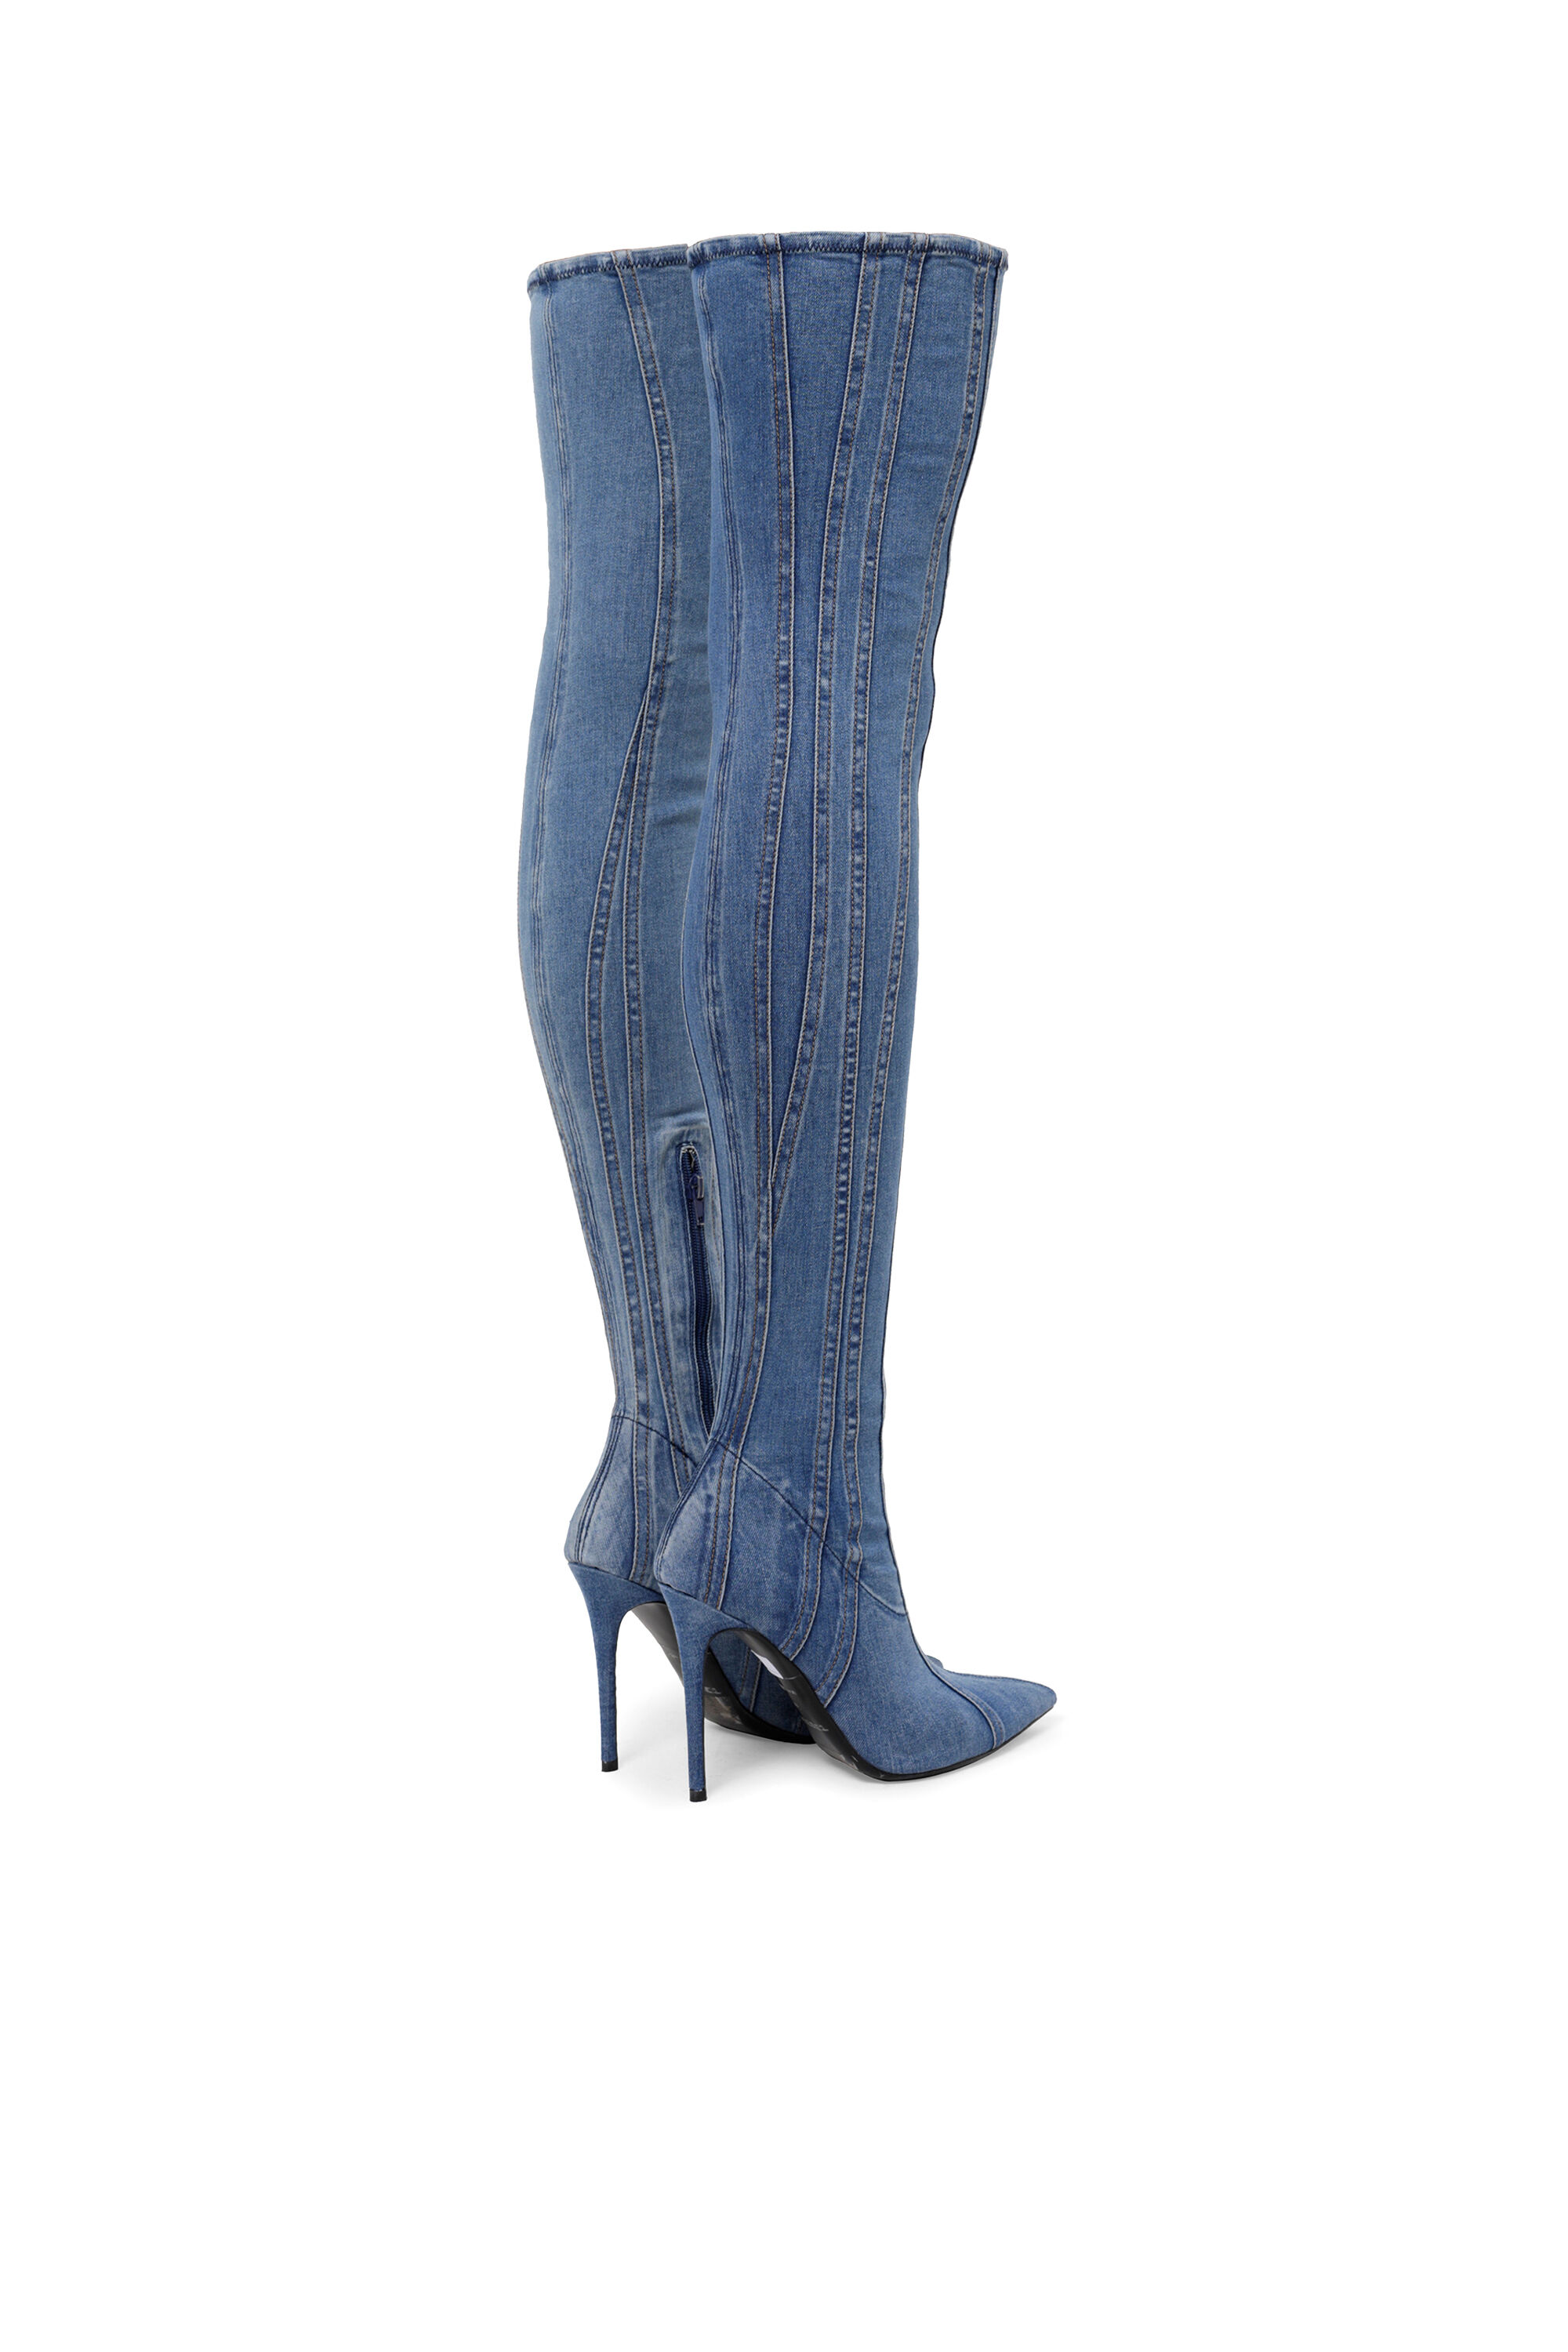 Diesel - D-YUCCA OTK, Woman D-Yucca Otk - Over-the-knee boots in denim in Blue - Image 3